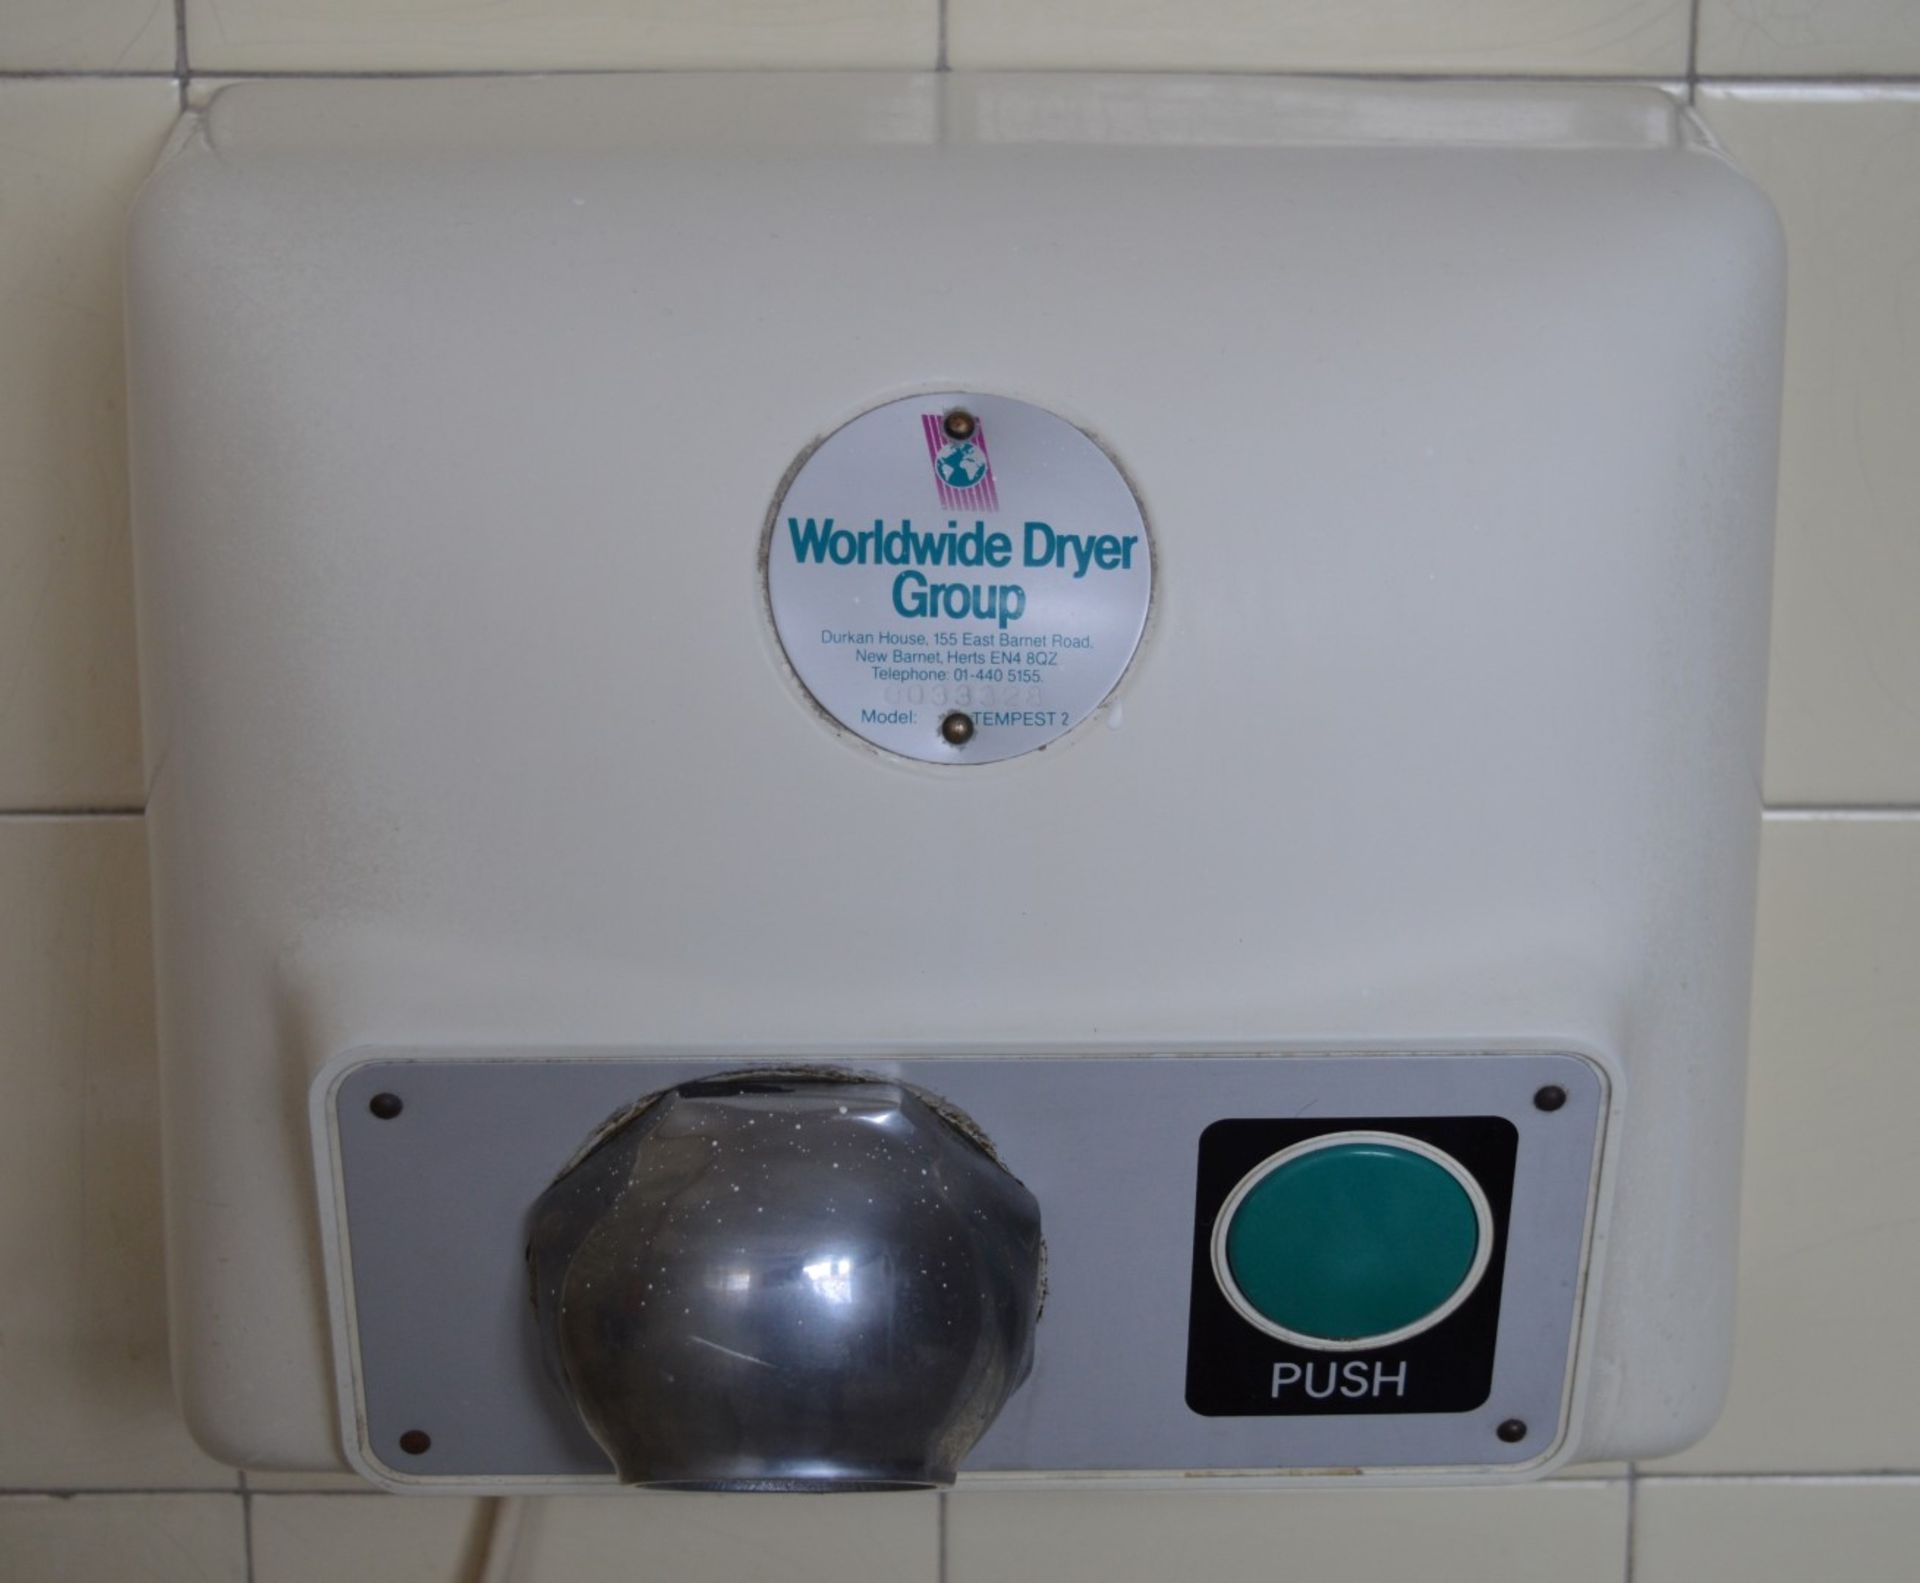 1 x Vintage Worldwide Dryer Group Electric Hand Dryer - Model Tempest 2 - 30 x 25 cms - Ref 376 2F - - Image 2 of 3